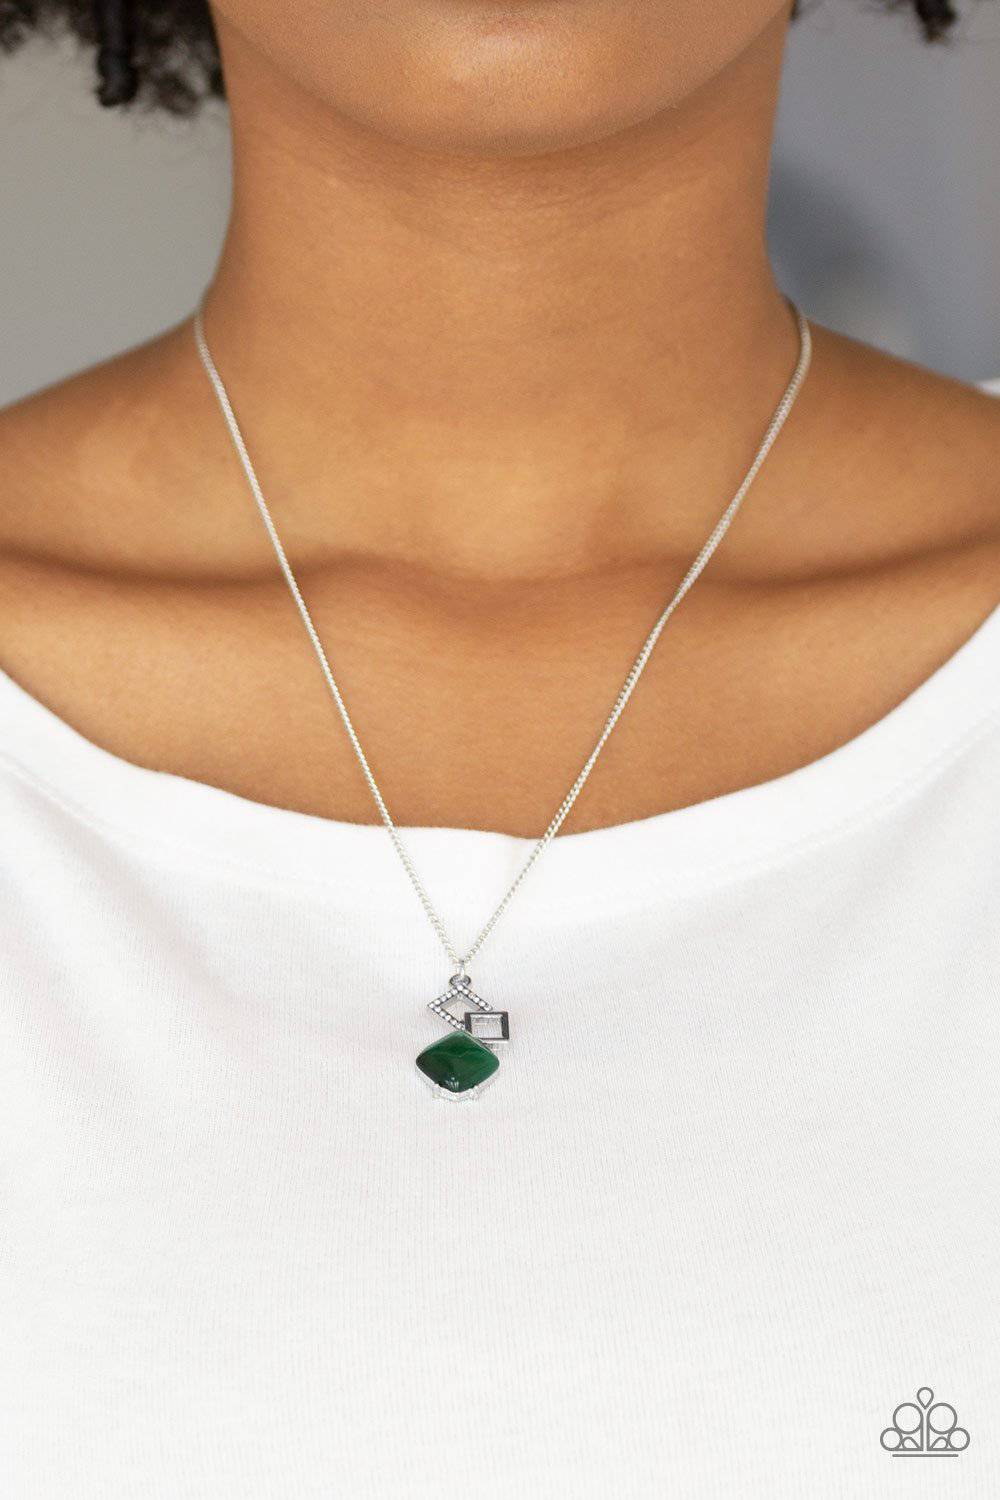 A345 - Stylishly Square Green Necklace by Paparazzi Accessories on Fancy5Fashion.com